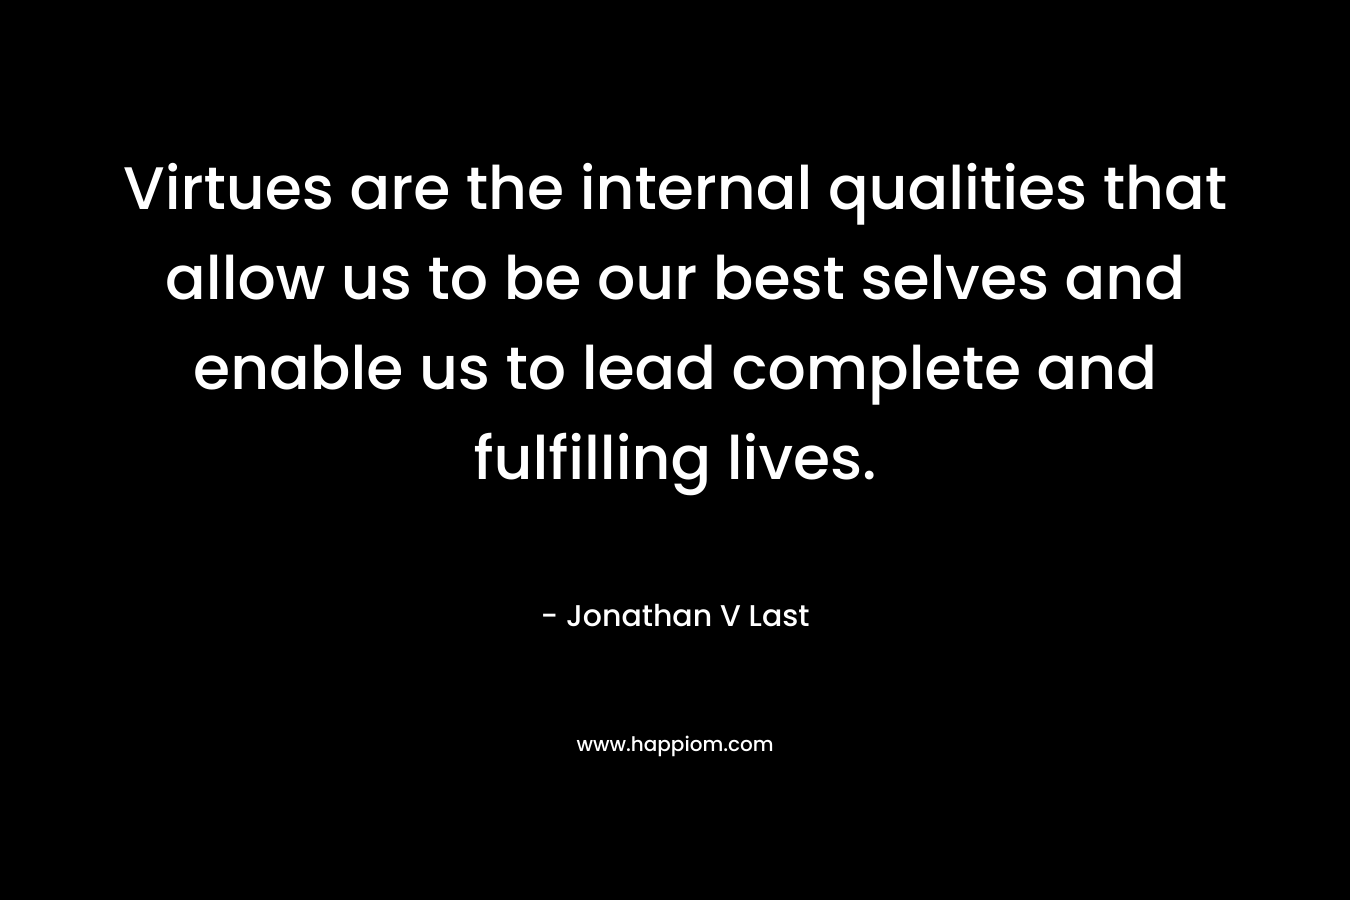 Virtues are the internal qualities that allow us to be our best selves and enable us to lead complete and fulfilling lives.